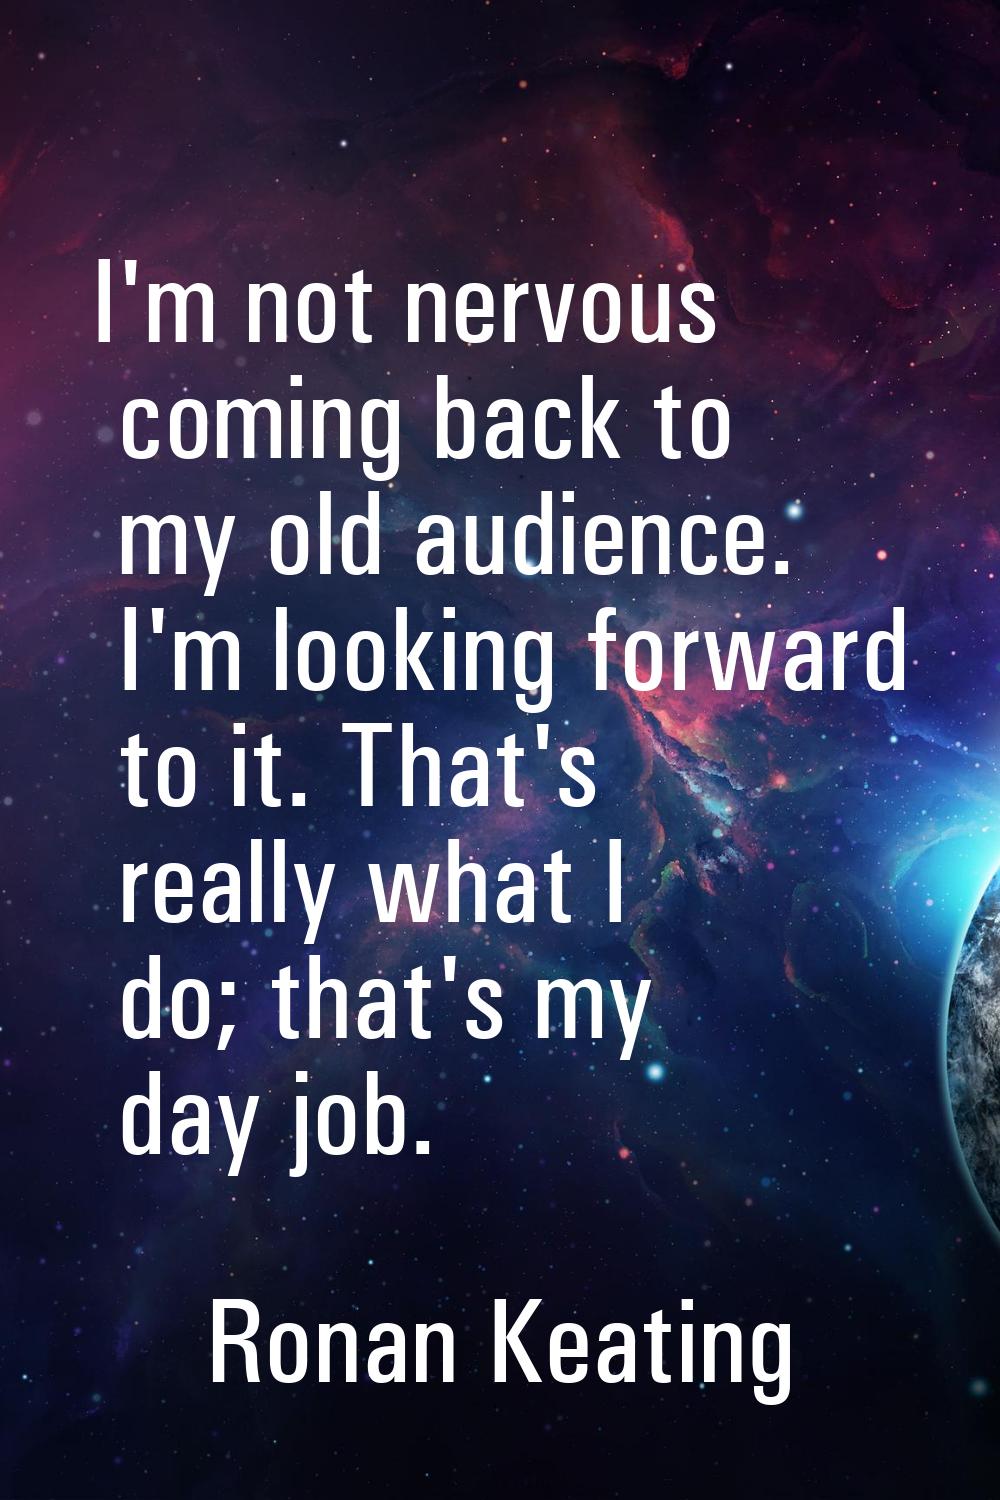 I'm not nervous coming back to my old audience. I'm looking forward to it. That's really what I do;